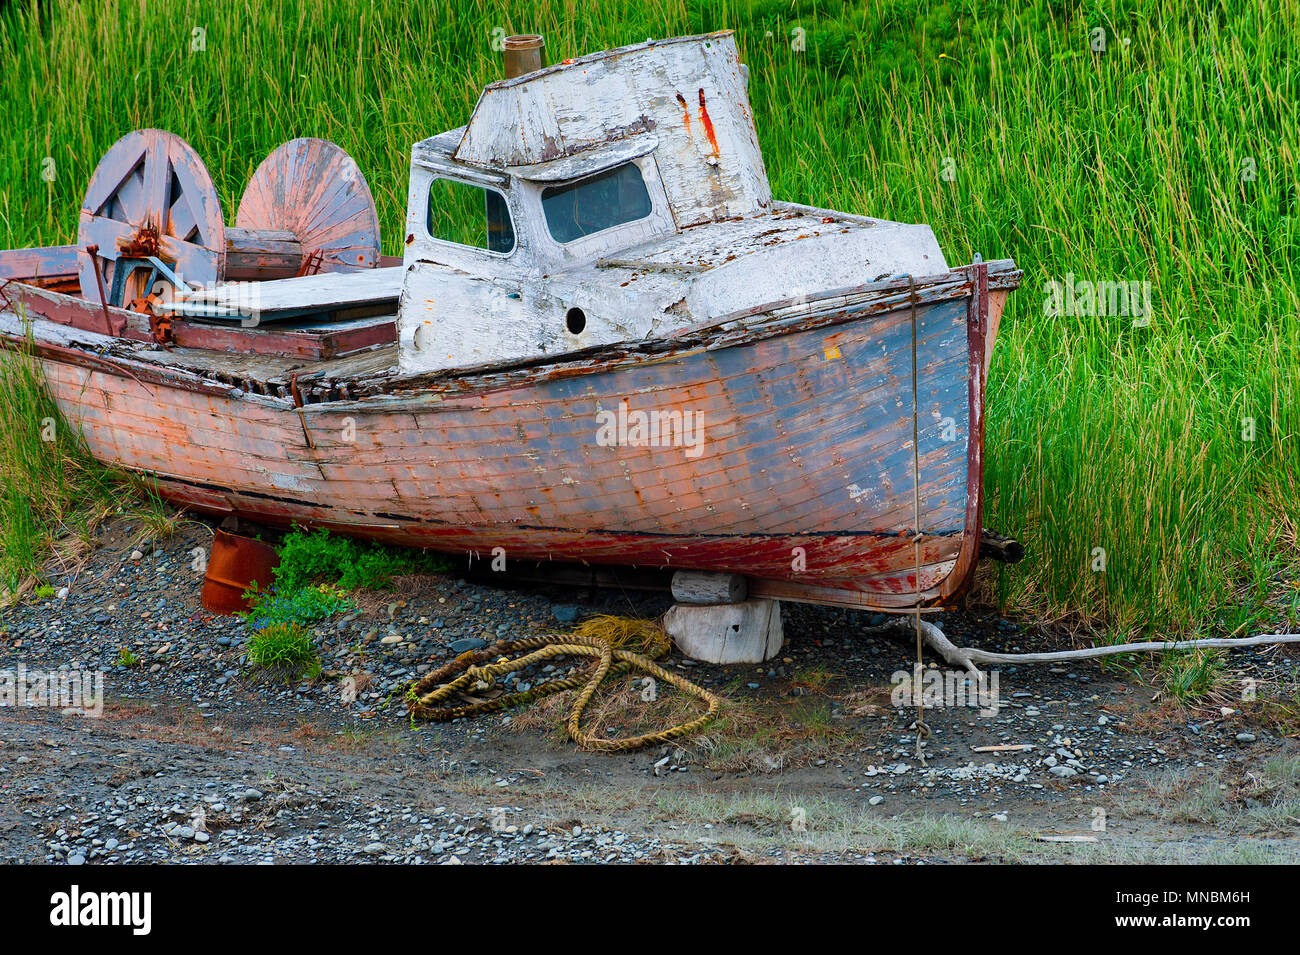 Decaying abandoned boat in a grassy field seen from walking path along the shores of Kachemak Bay in Homer Alaska. Stock Photo